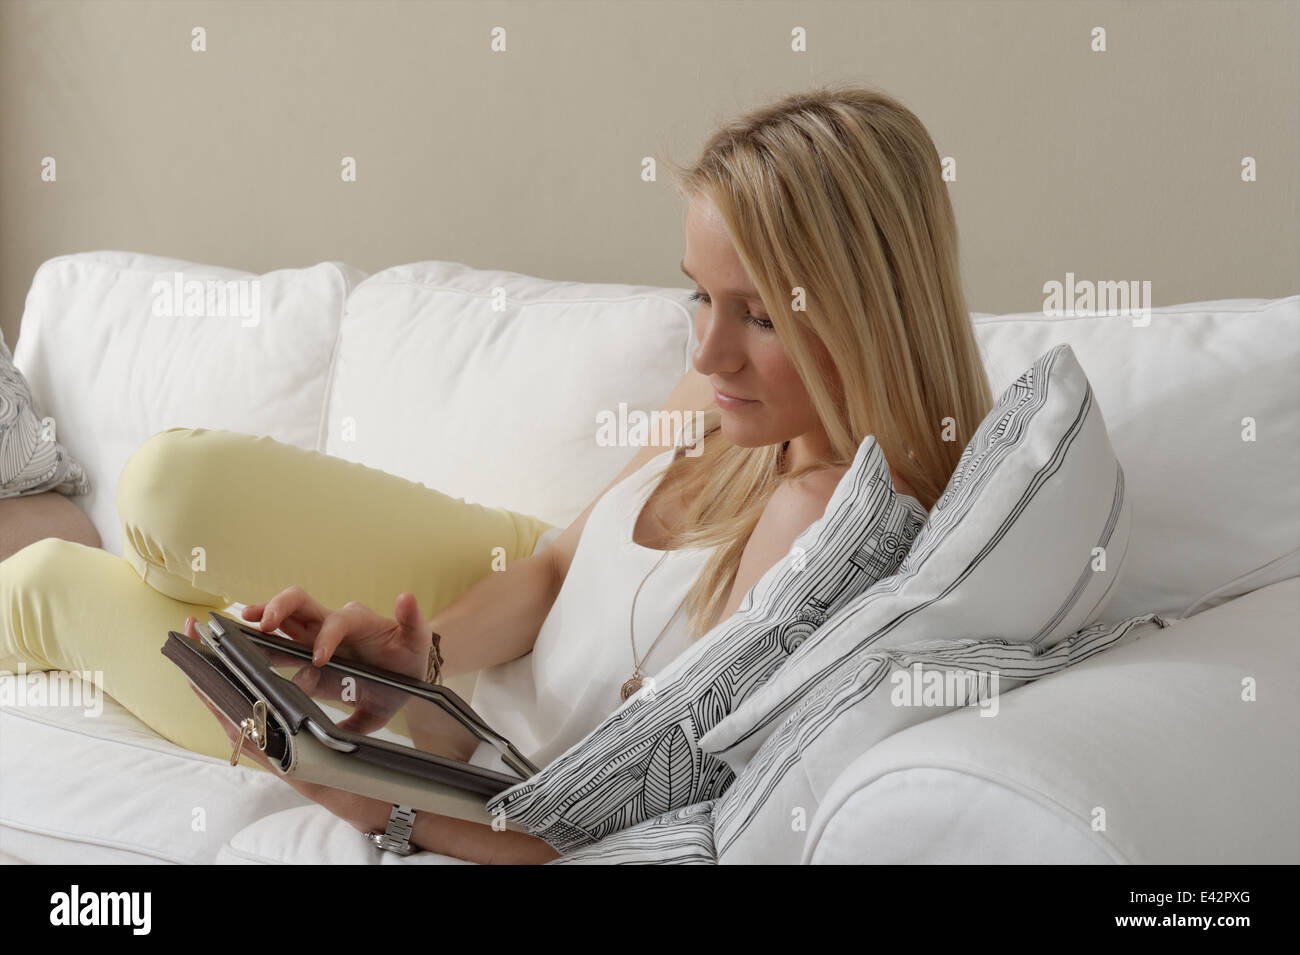 Young woman on sofa using touchscreen on digital tablet Stock Photo